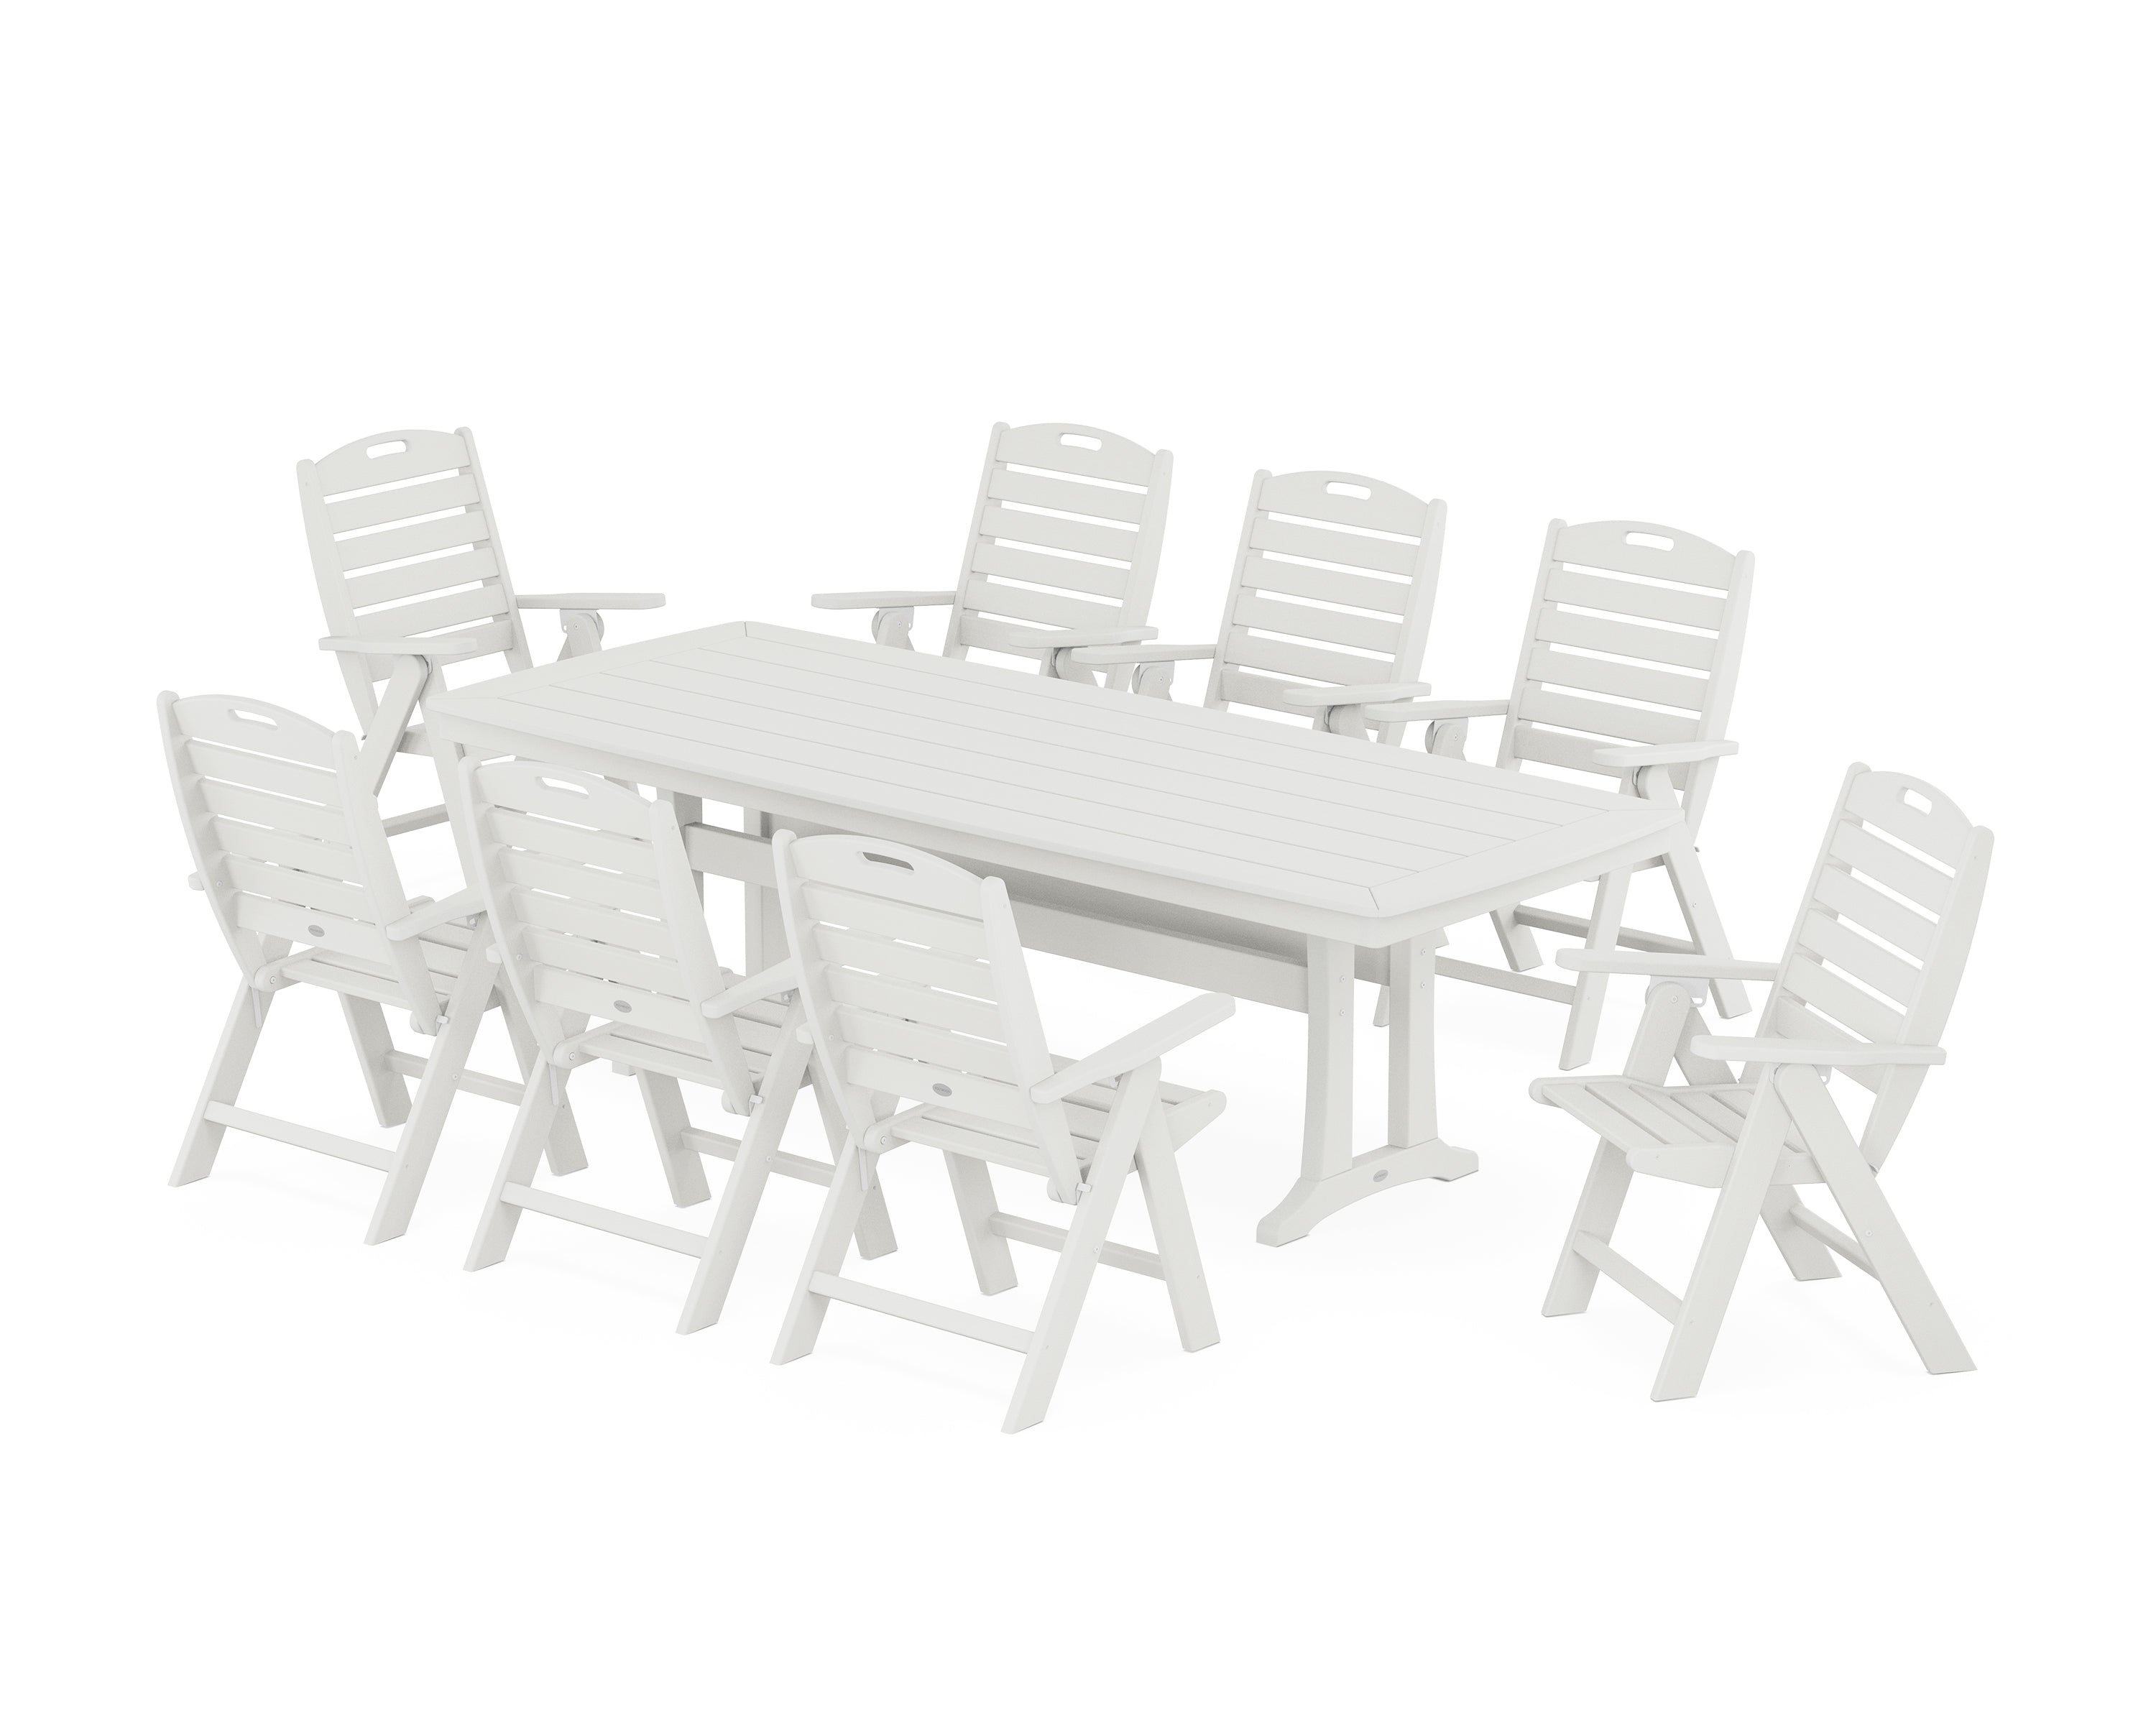 POLYWOOD® Nautical Highback 9-Piece Dining Set with Trestle Legs in Vintage White